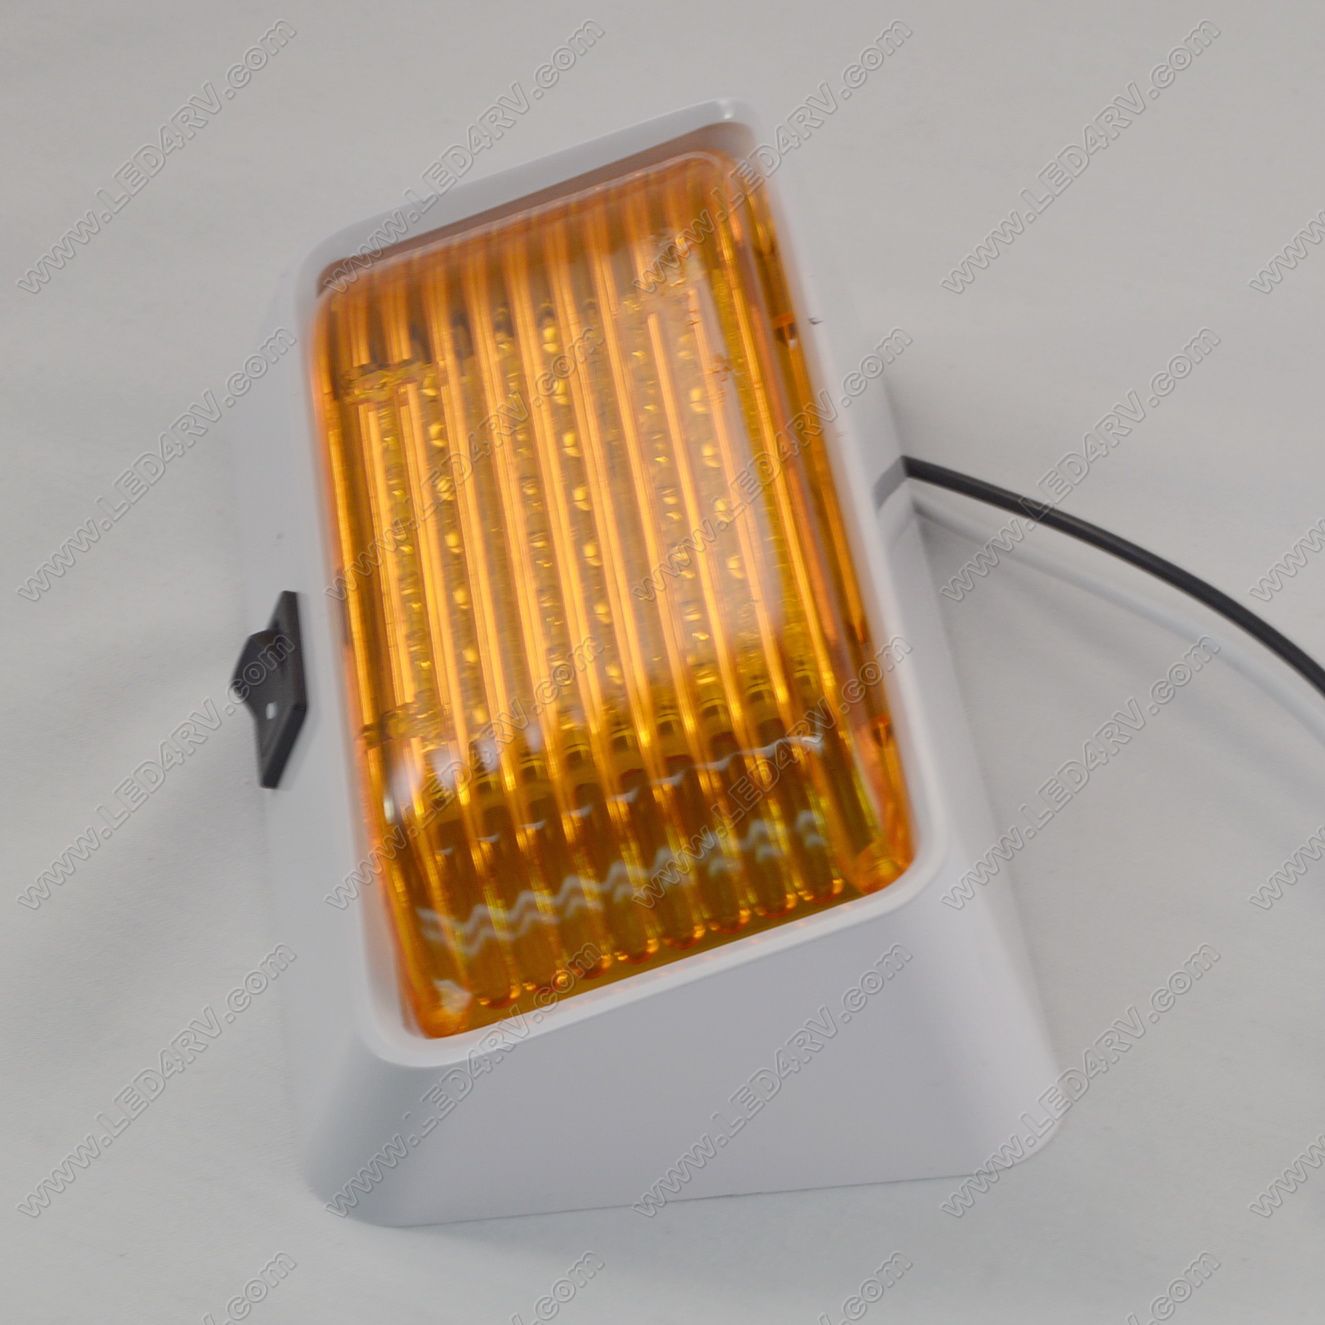 Patio LED Light 6 by 3.25 in Amber Lens with switch SKU1240